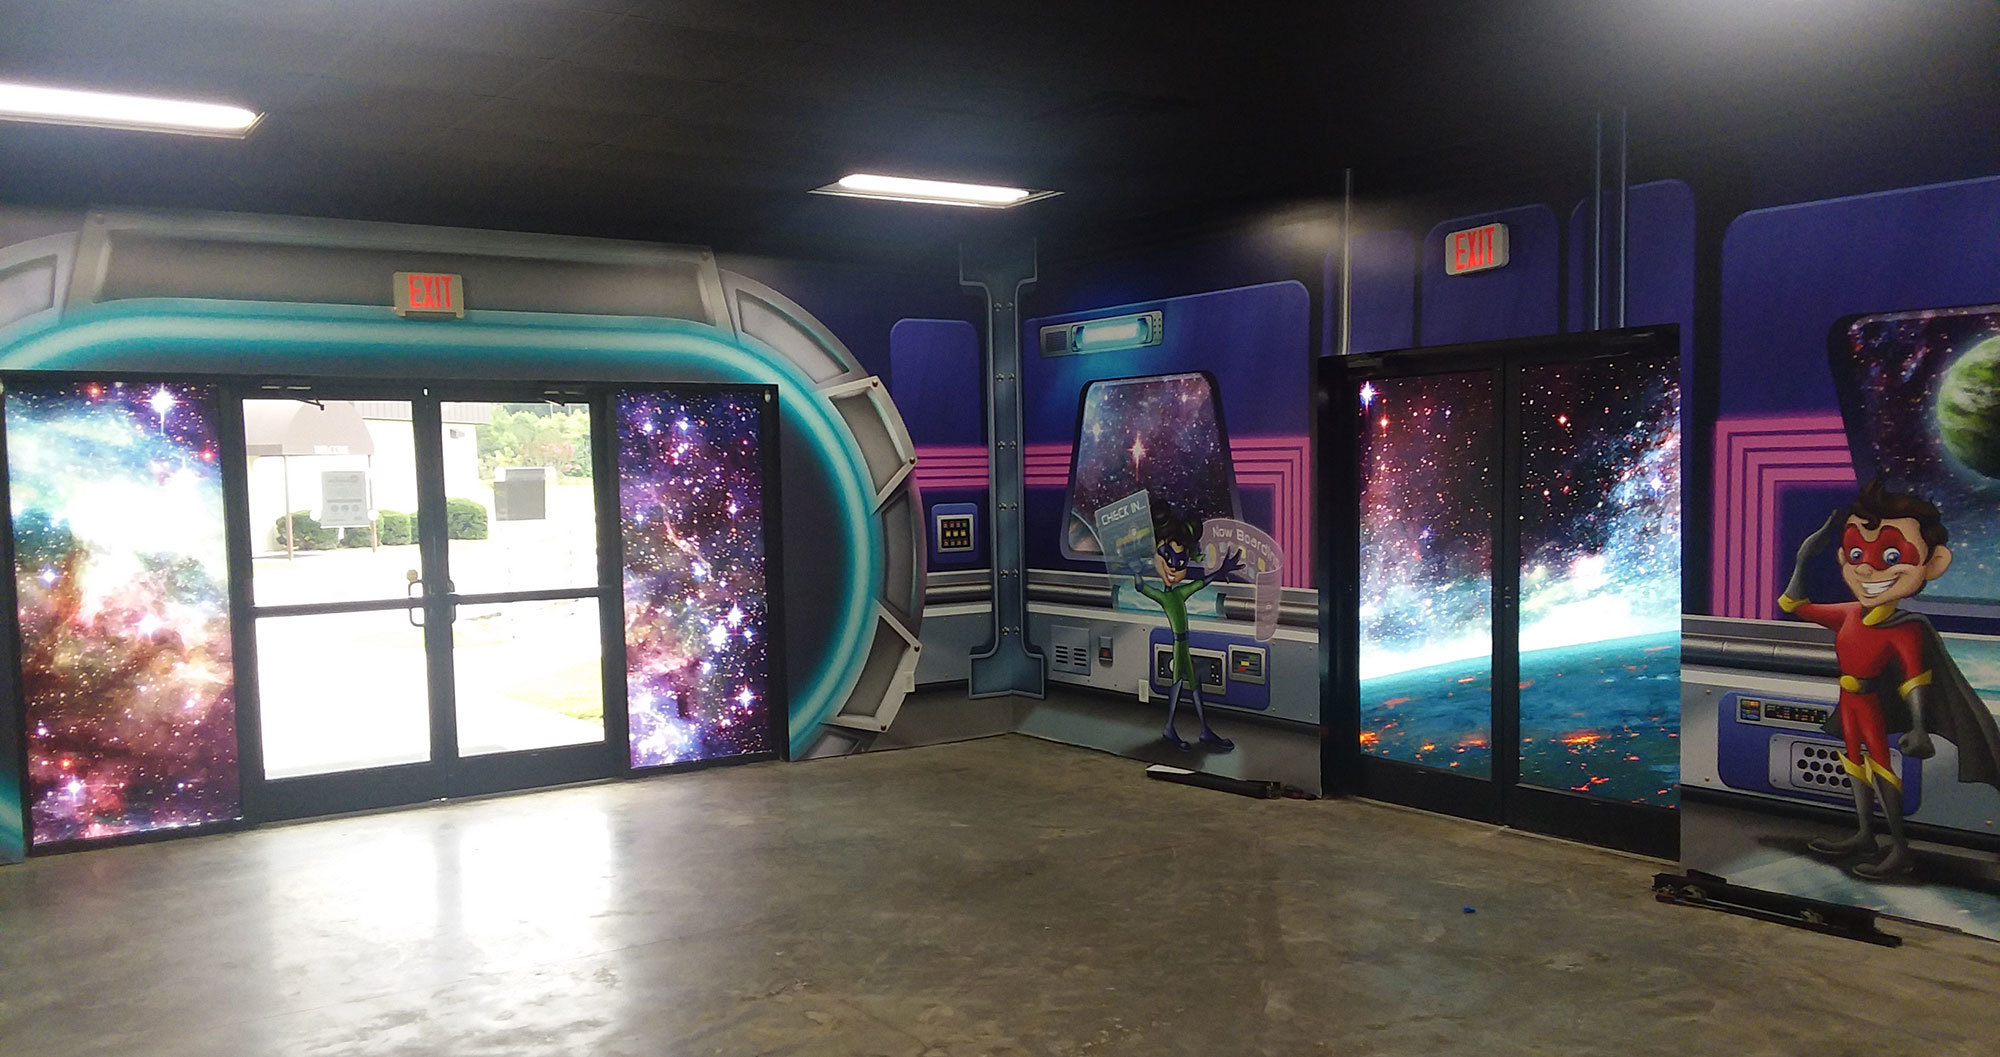 Example of Window Vinyl and murals in a Space Themed Space at a Church, featuring views of the stars and the interior of a space station with kid characters.